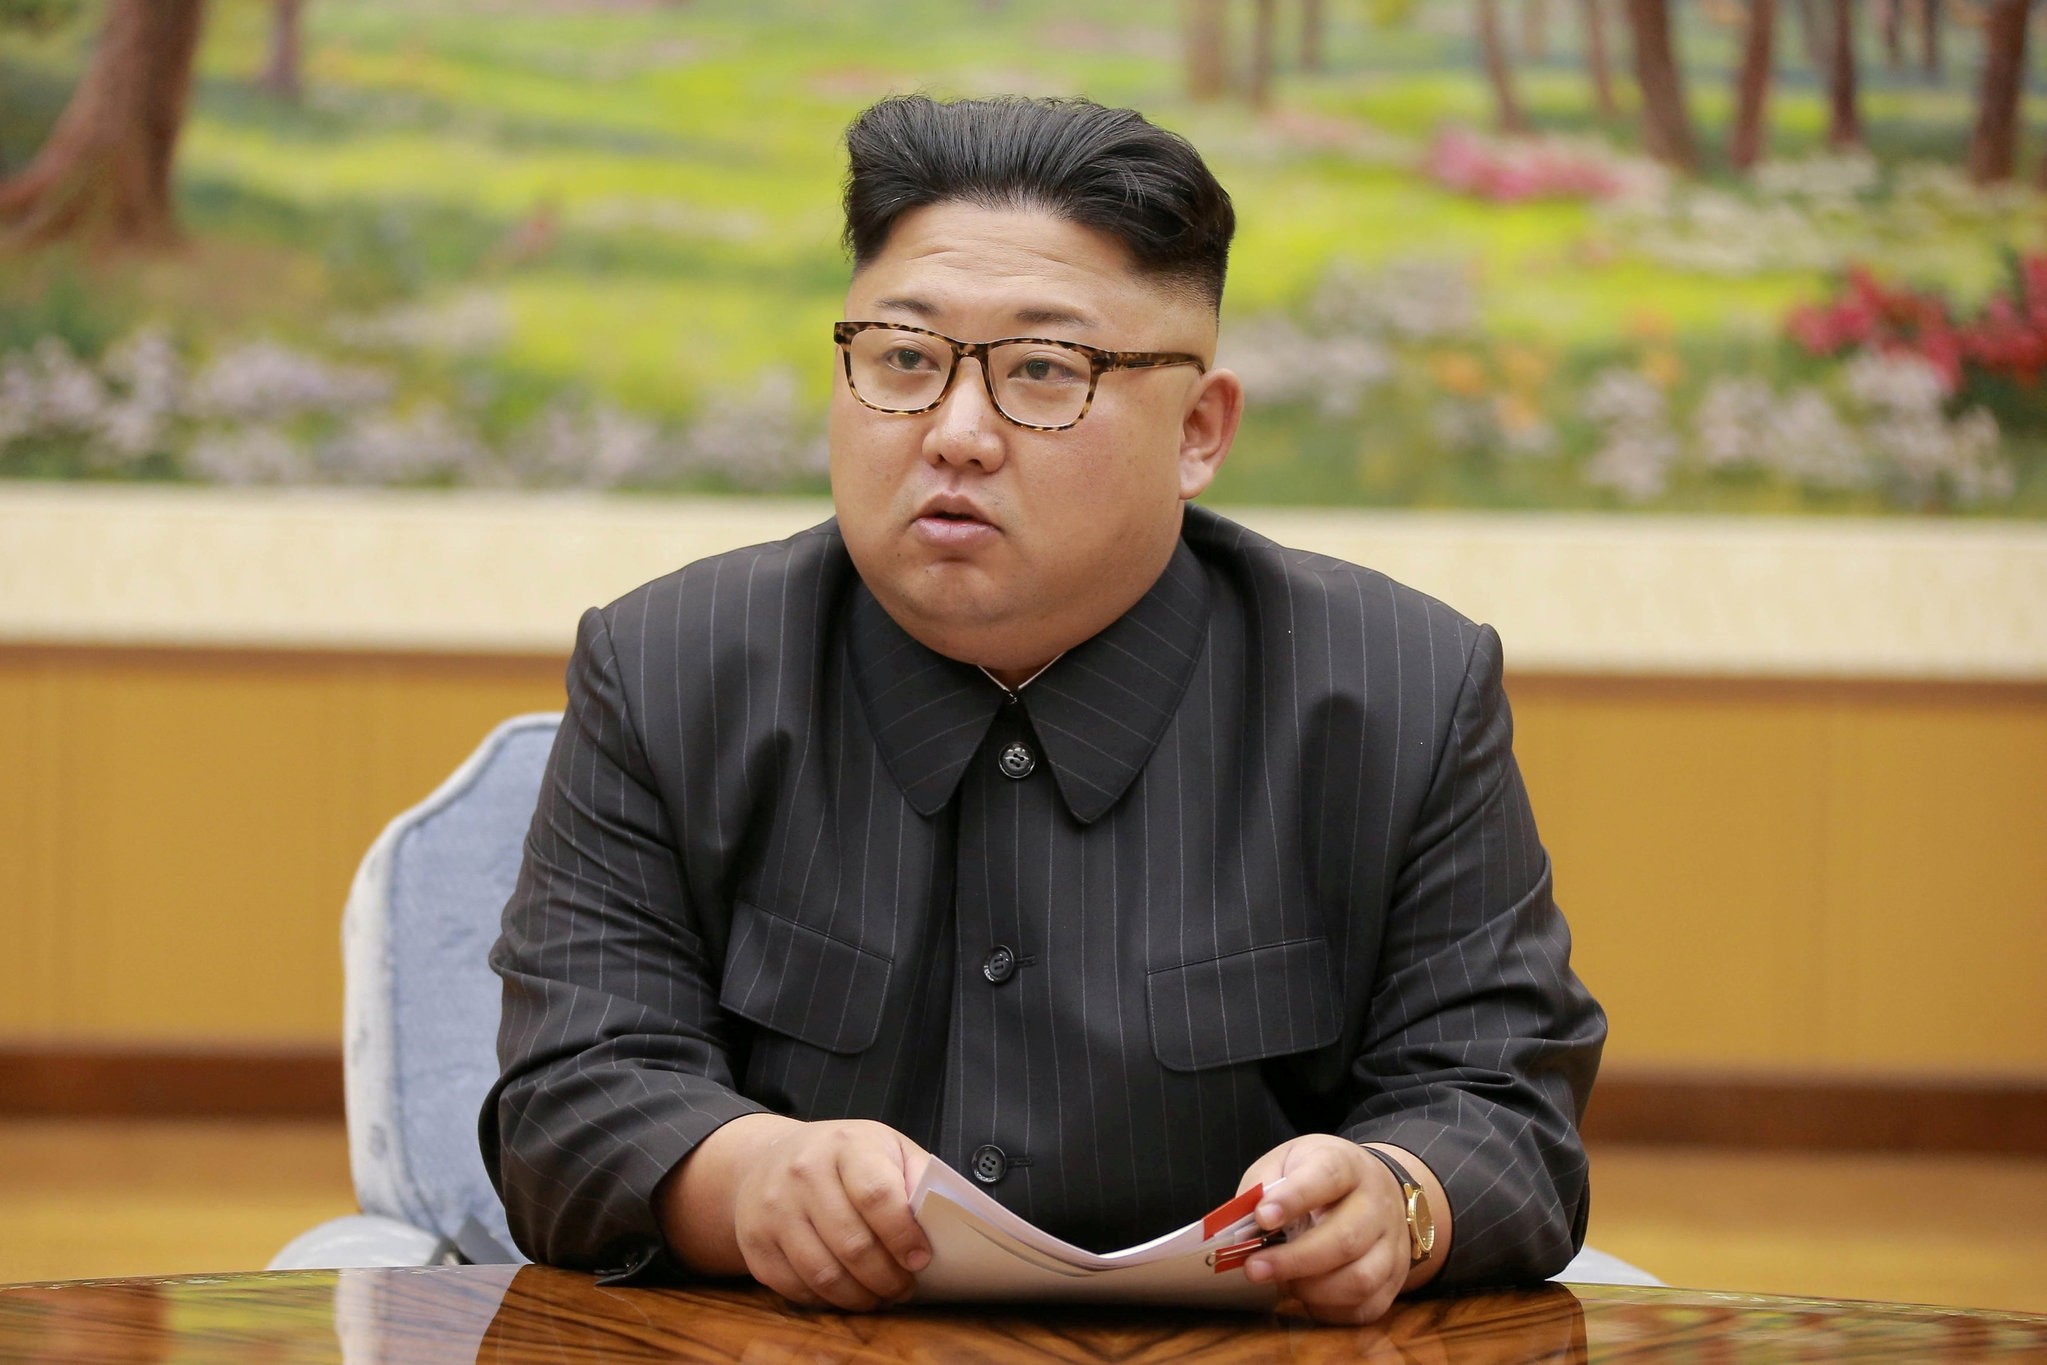 North Korean leader Kim Jong Un participates in a meeting with the Presidium of the Political Bureau of the Central Committee of the Workers Party of Korea in this undated photo released by KCNA. (REUTERS Photo)